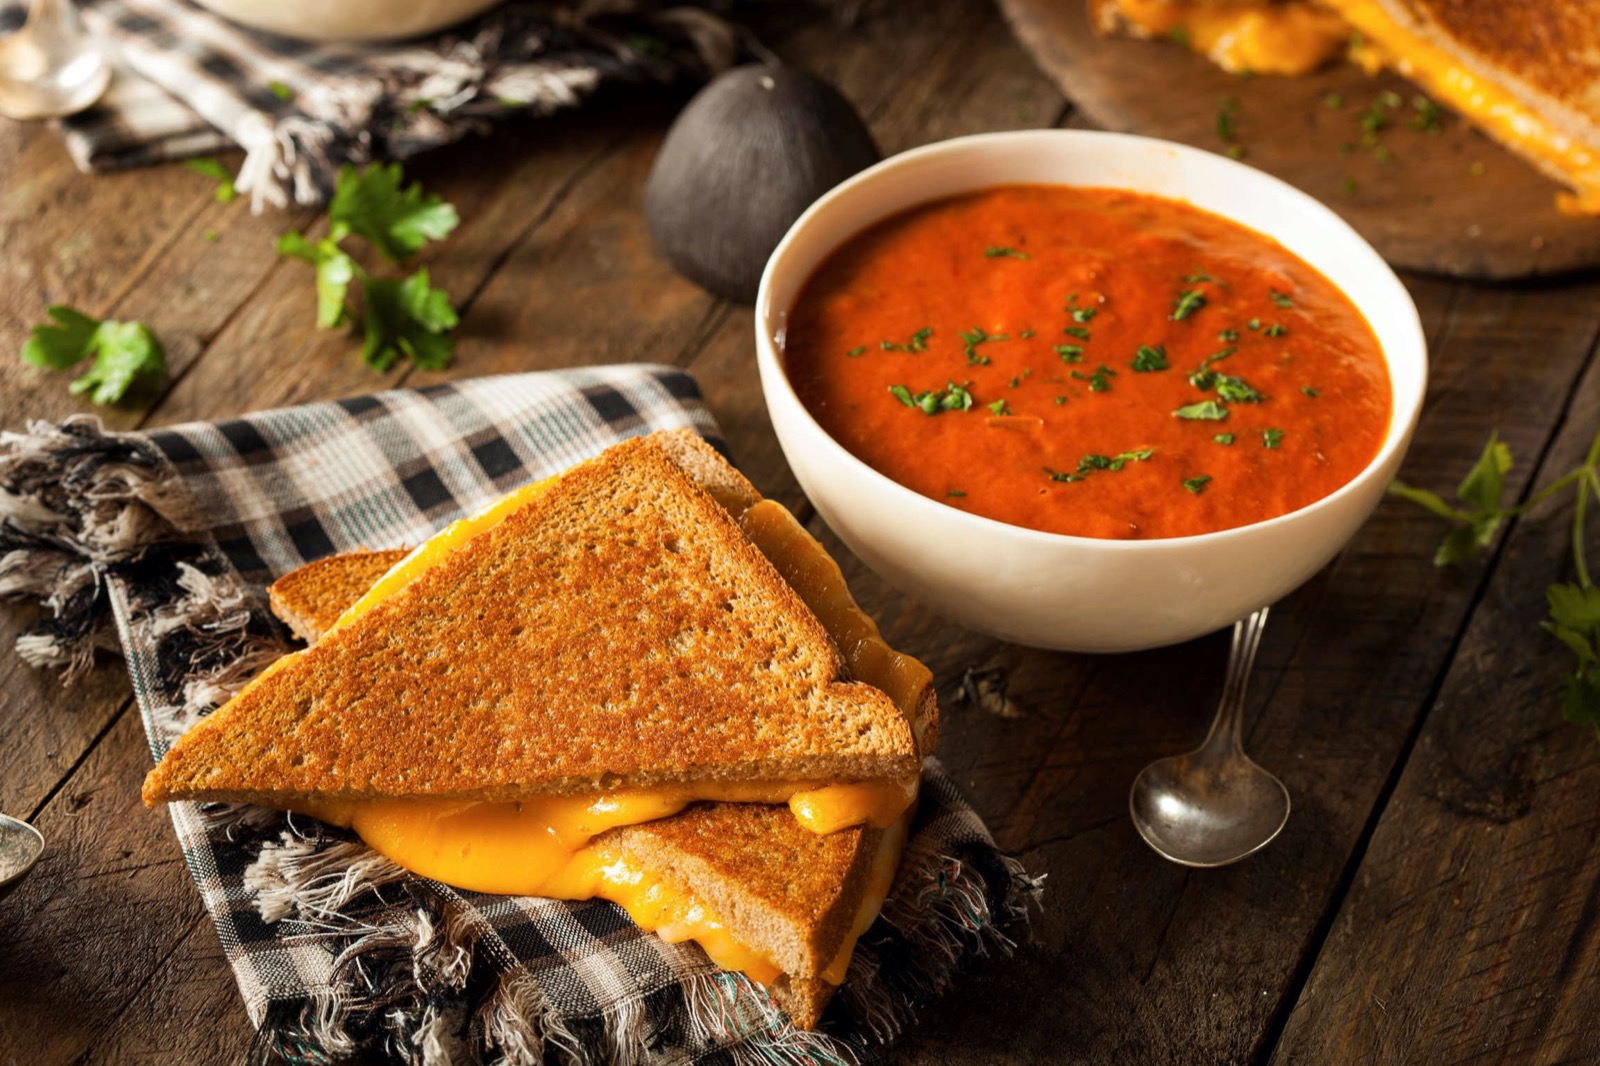 Say “Yum” Or “Yuck” to These Food Pairings to Find Out If You Are More Creative or Logical Grilled cheese and tomato soup